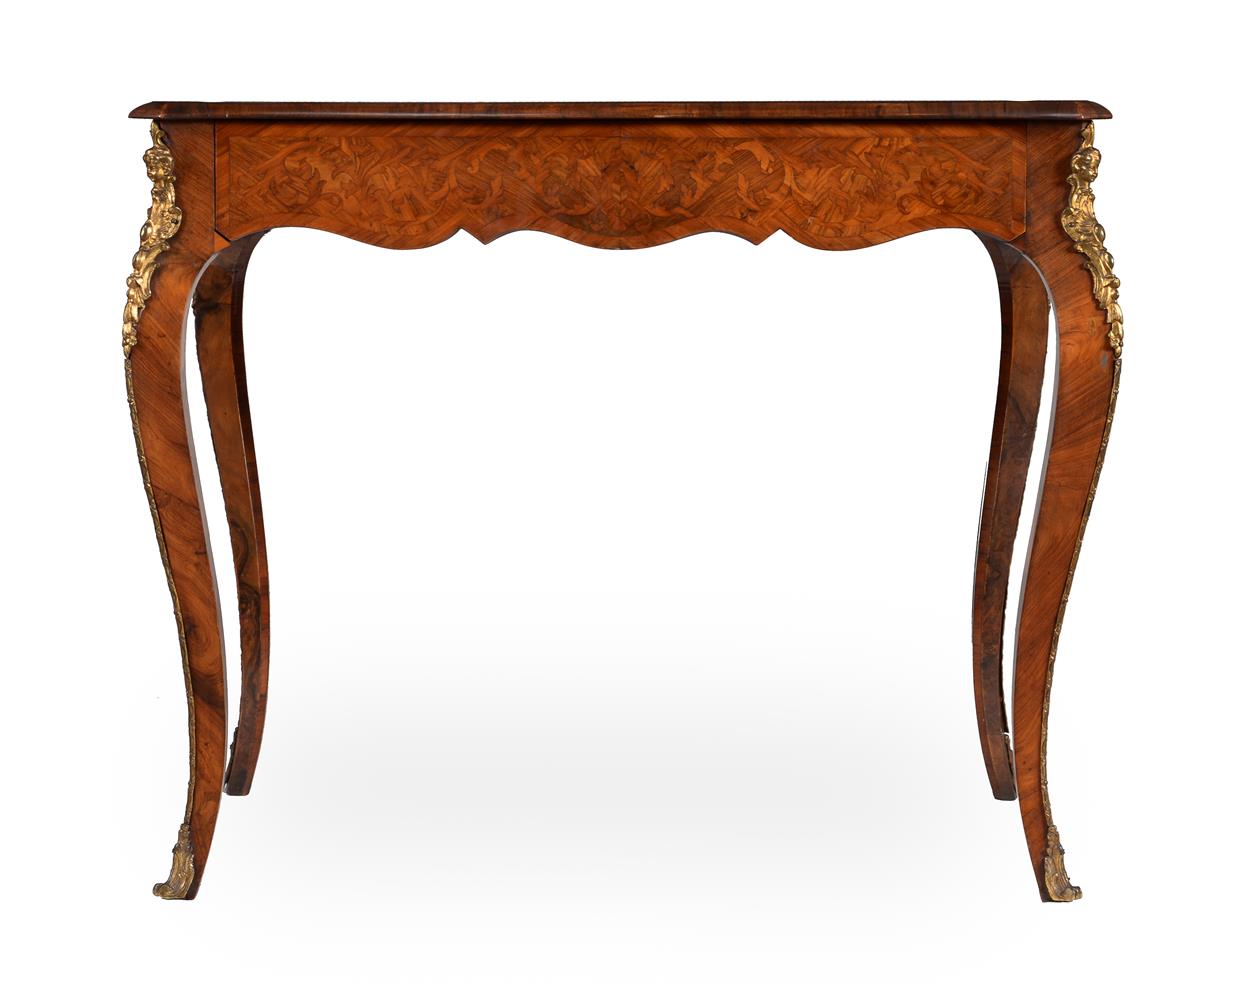 A VICTORIAN WALNUT AND MARQUETRY BUREAU PLAT, SECOND HALF 19TH CENTURY - Image 3 of 4